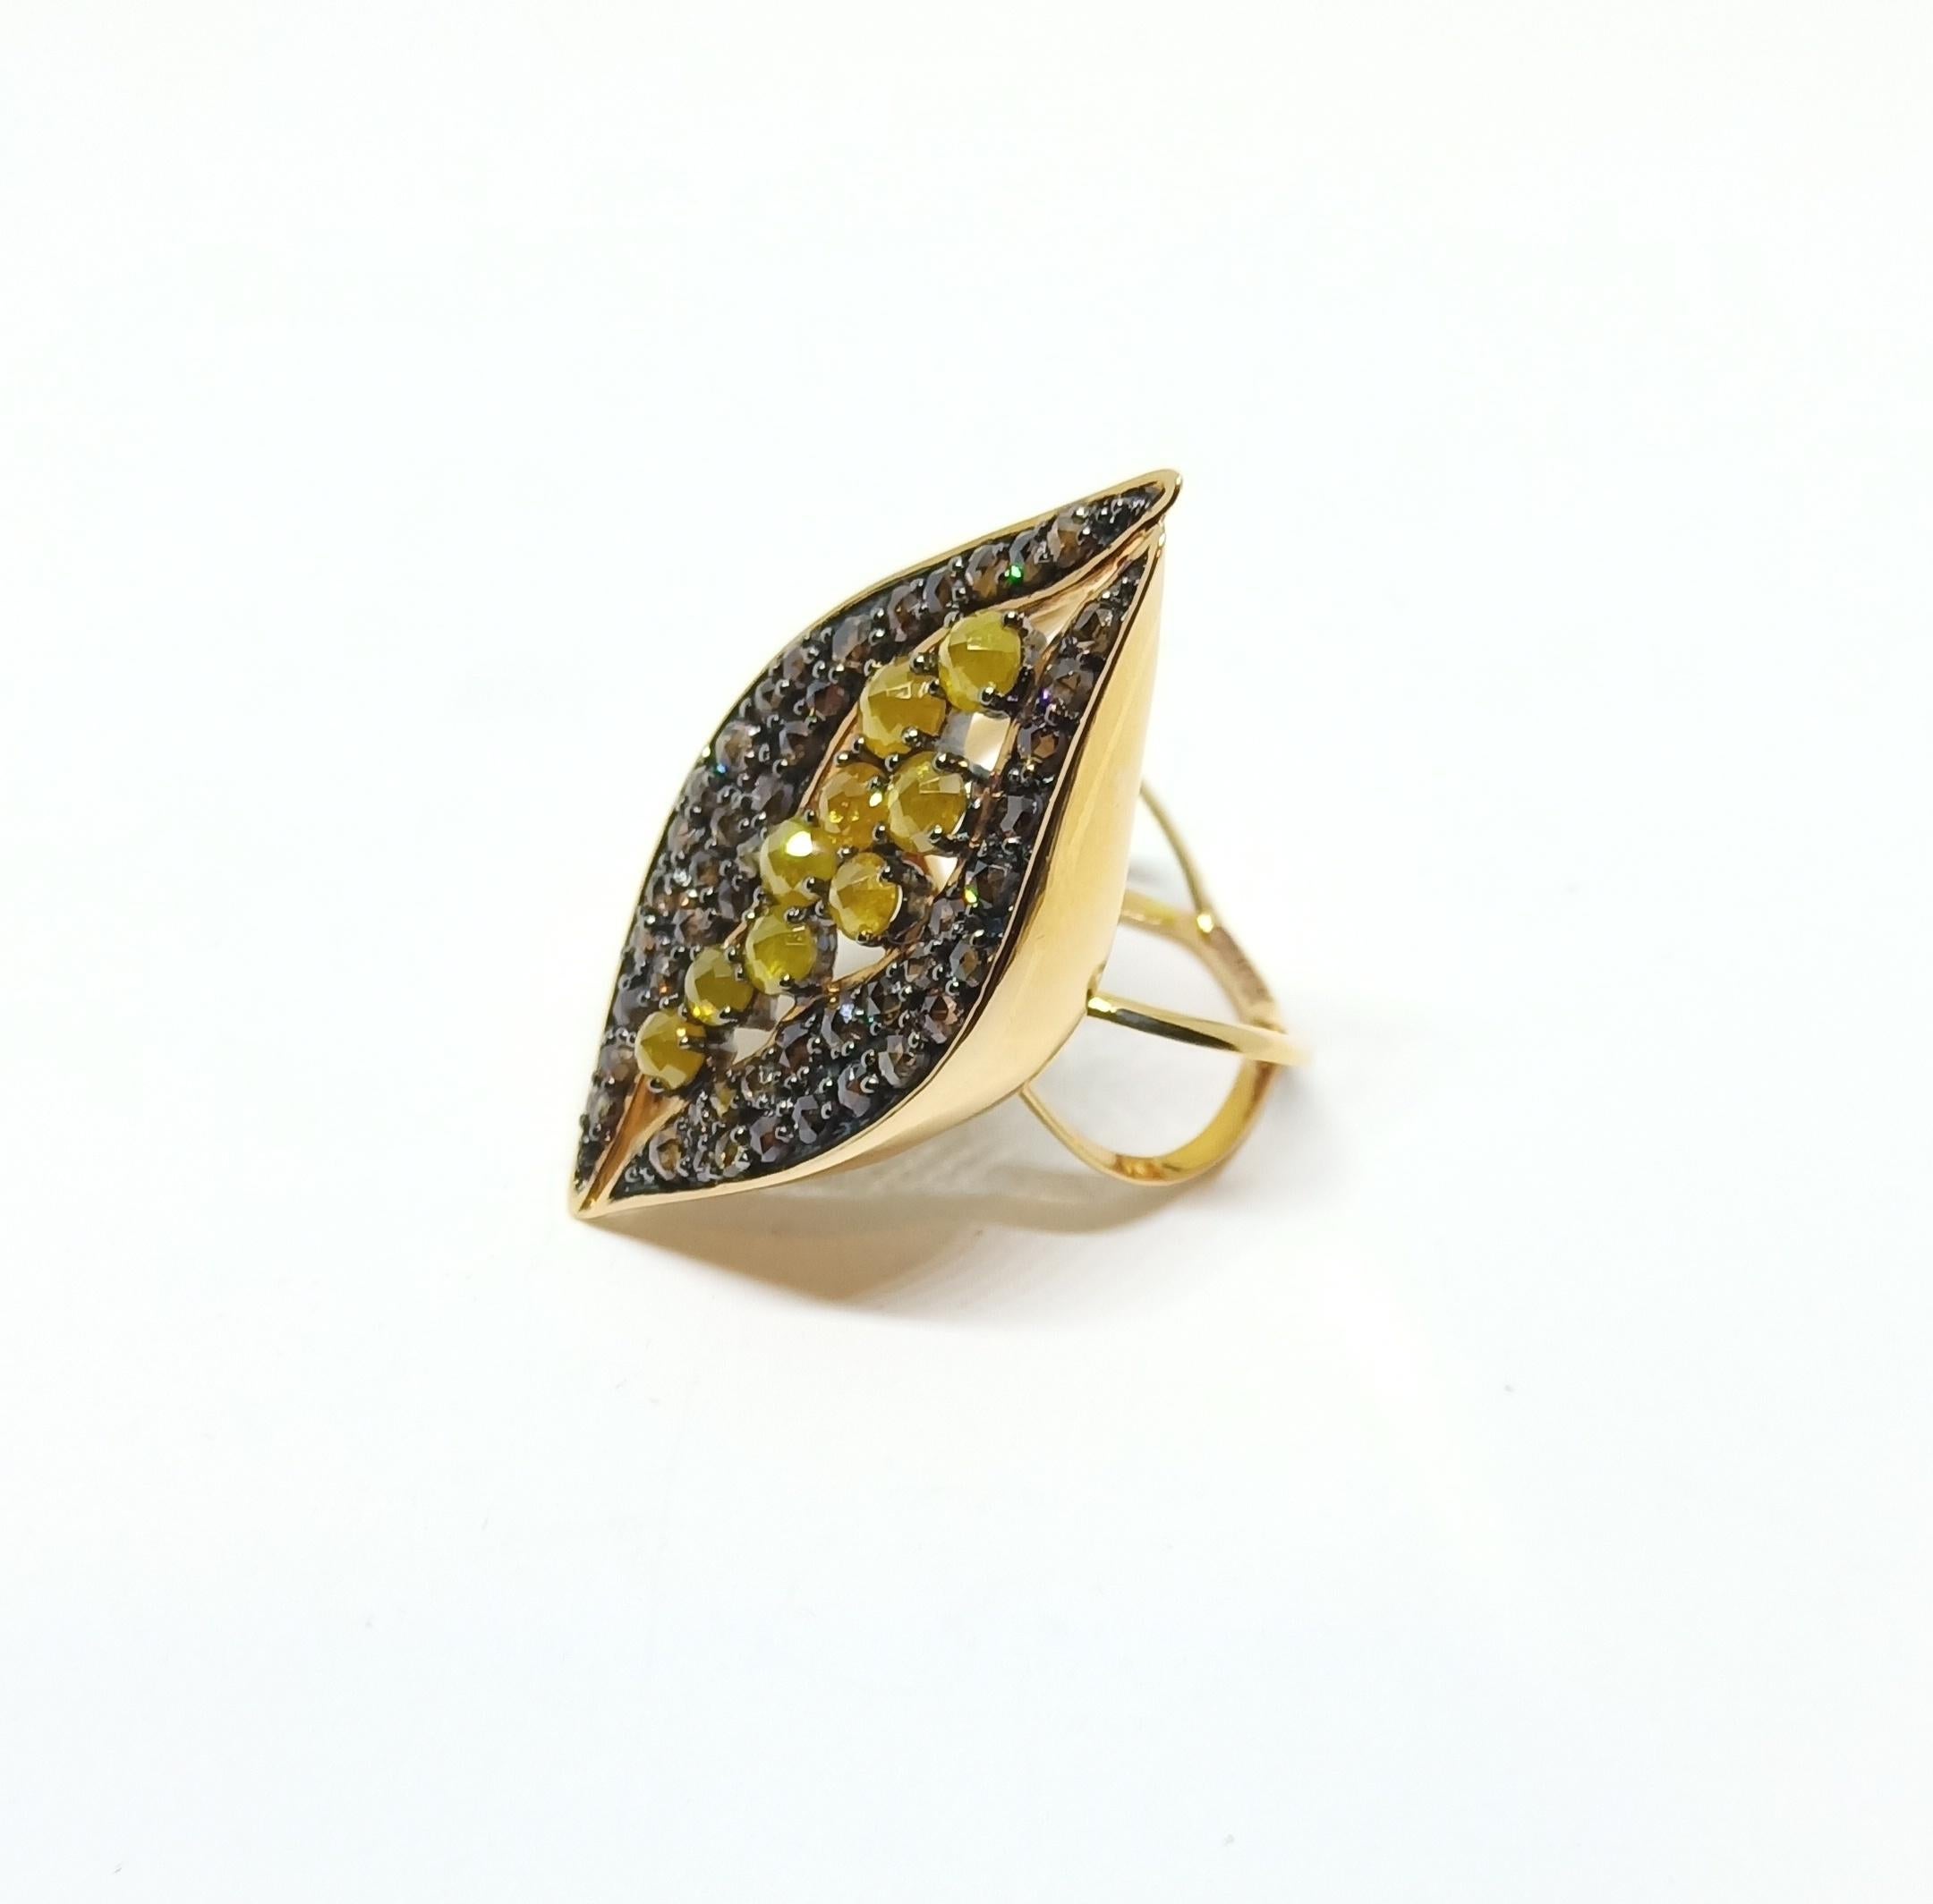 Rohit loves to do things his way, Differently. A simple Boat shaped Ring executed with immense detailing, featuring Fancy Colored Orange Yellow & Dark Brown Rose cut Diamonds. Be it the unique shaped dual band or the way in which the Yellow Rosecut